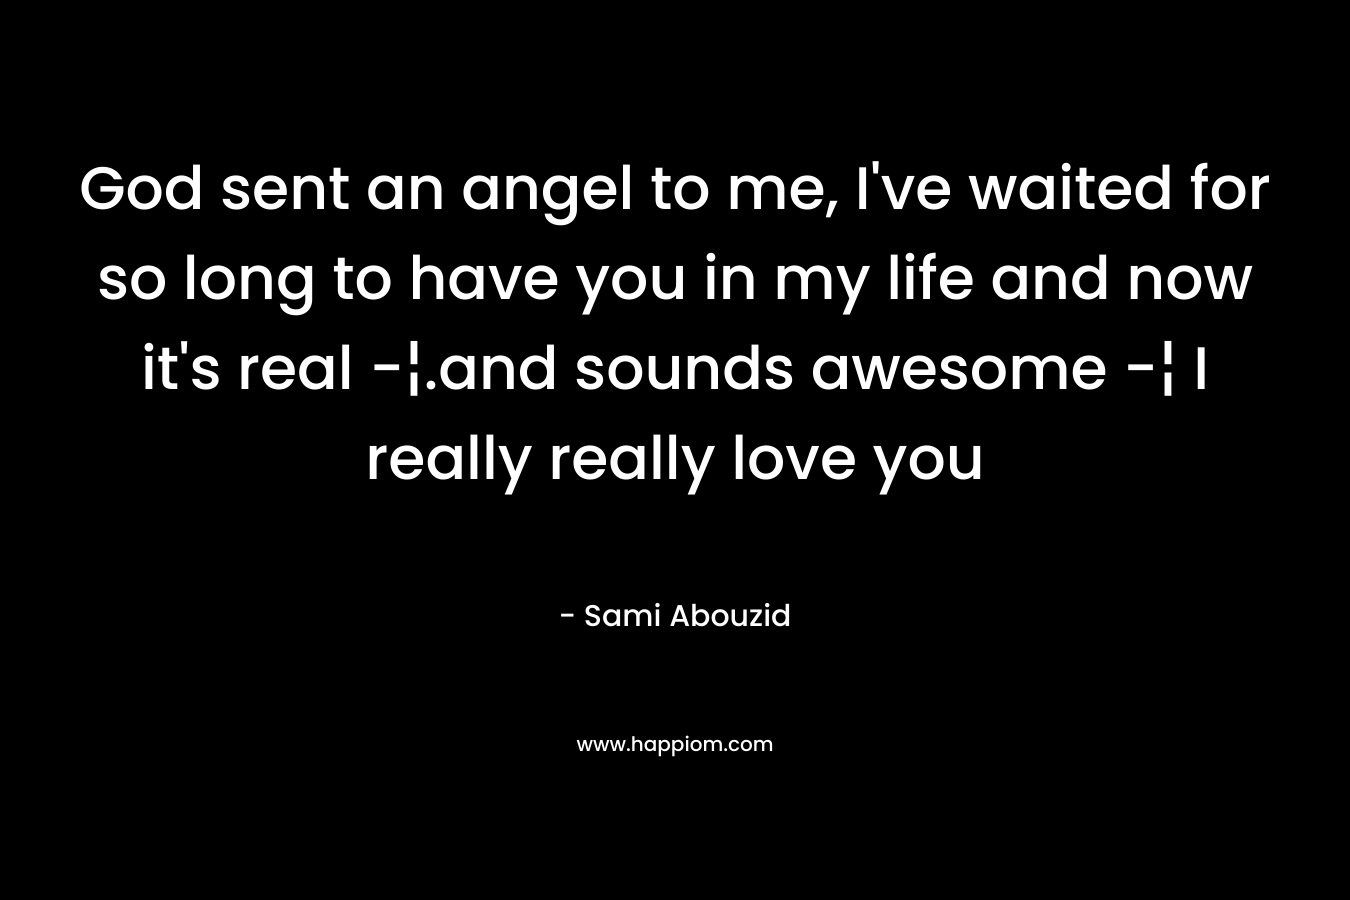 God sent an angel to me, I’ve waited for so long to have you in my life and now it’s real -¦.and sounds awesome -¦ I really really love you – Sami Abouzid